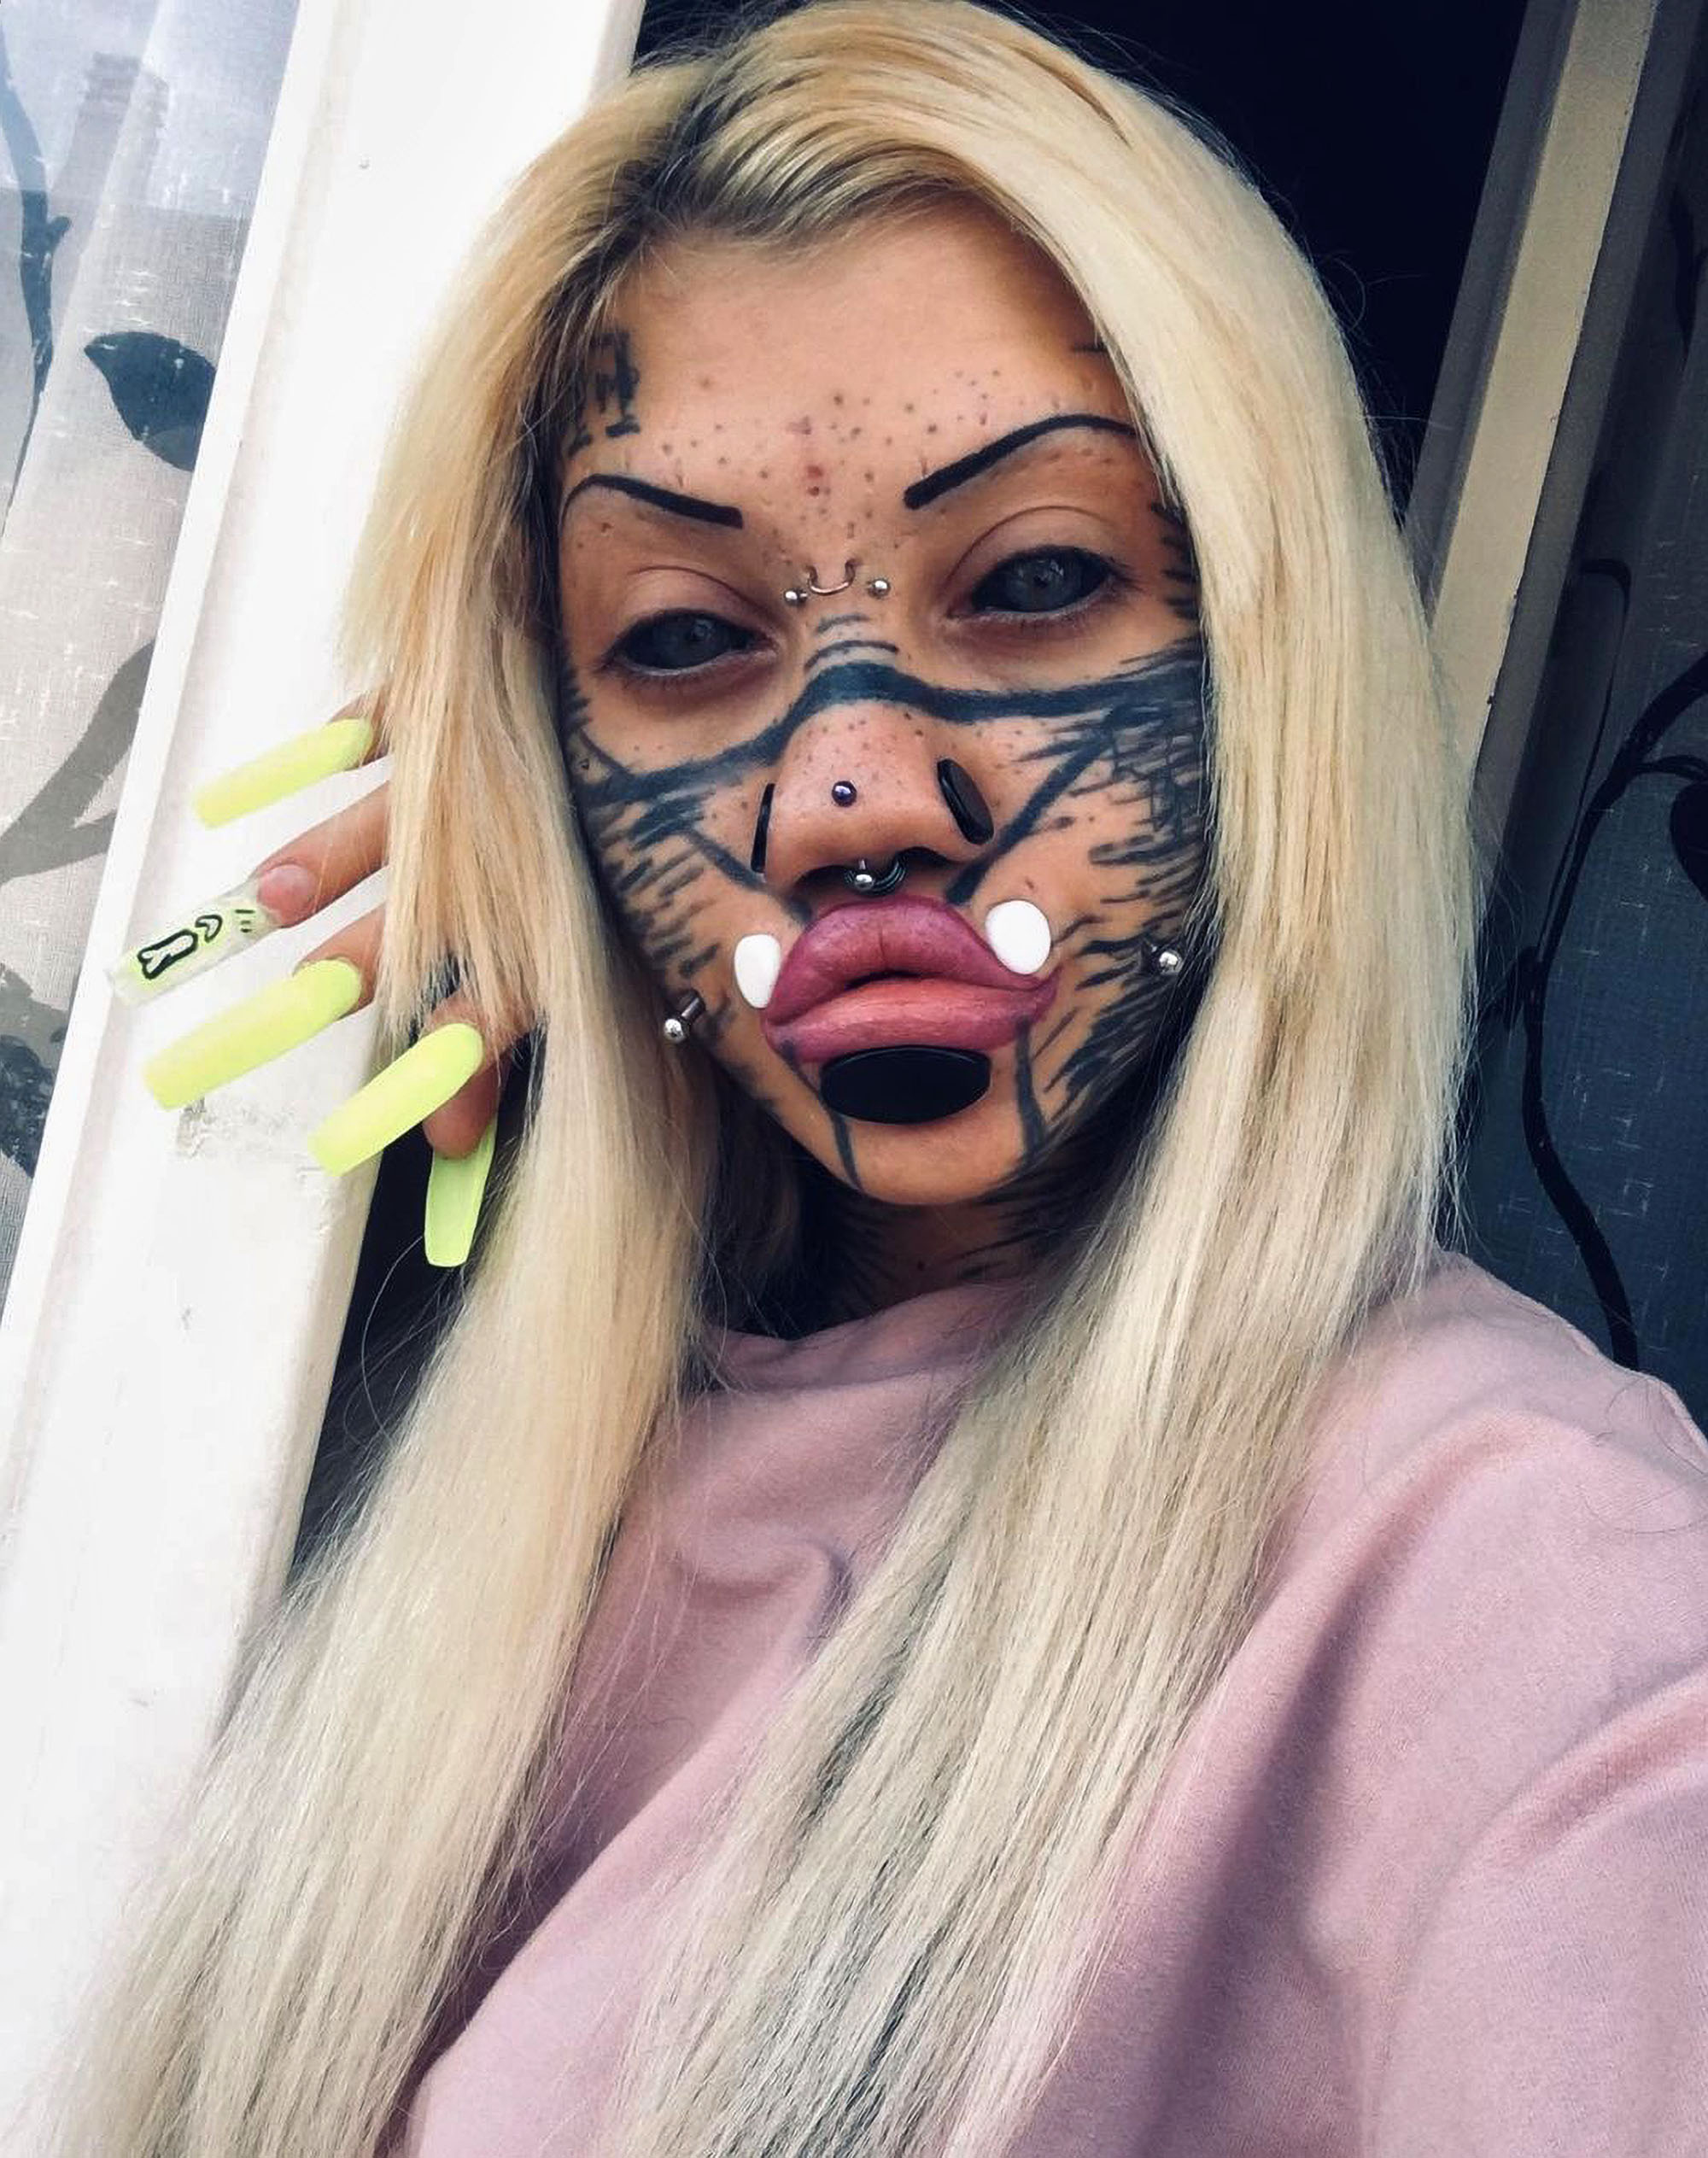 Read more about the article Teen Girl With Shocking Face Tattoo Goes Blonde And Wants Bigger Breasts To Be More Feminine